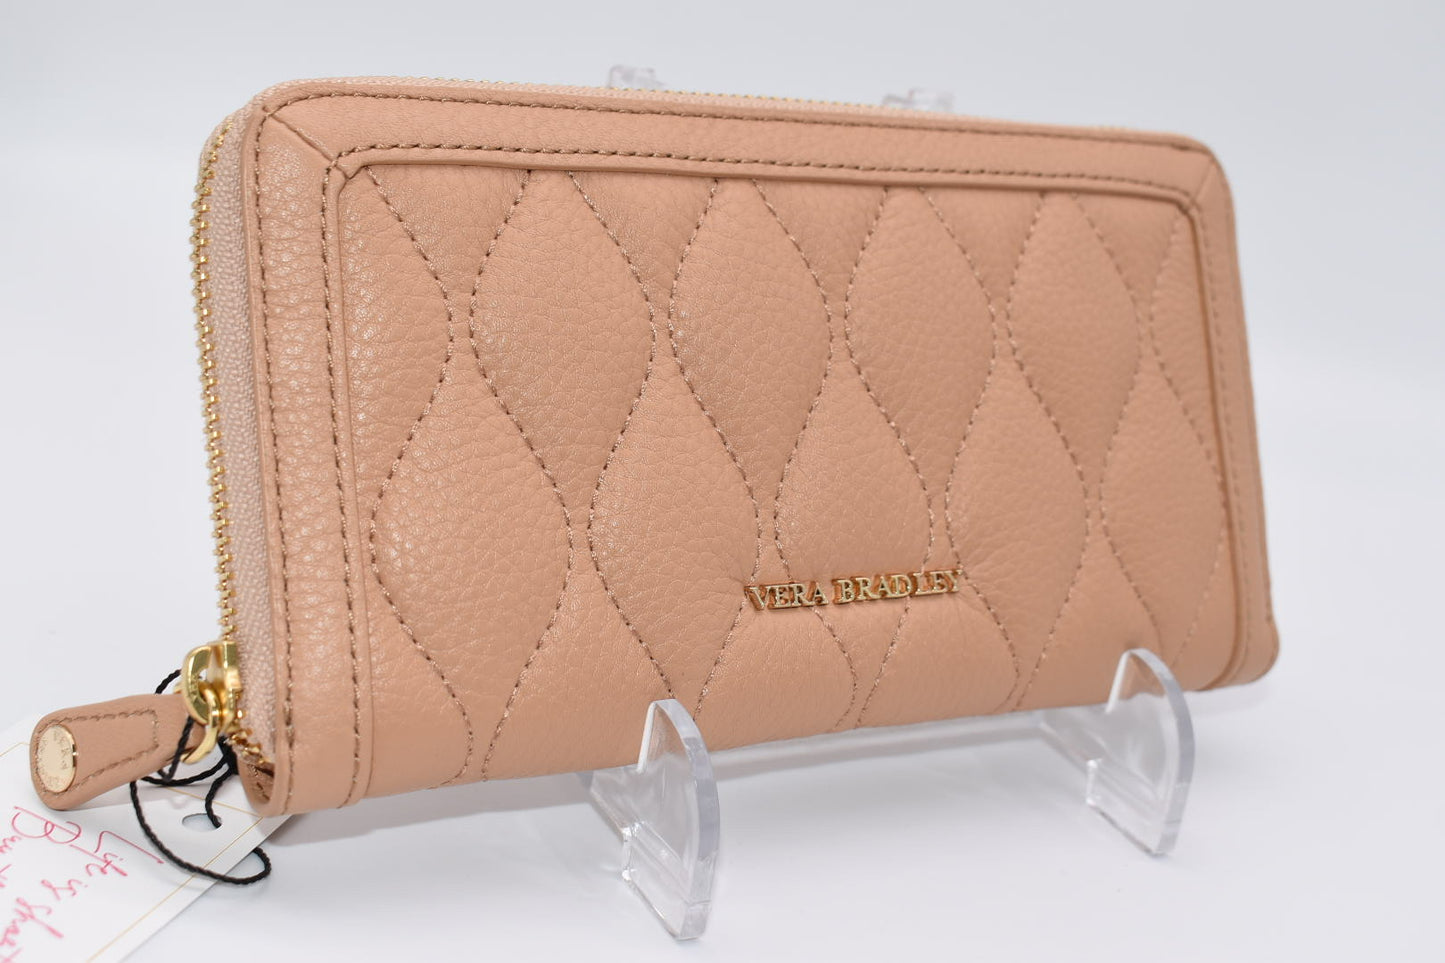 Vera Bradley Quilted Leather Georgia Wallet in Nude